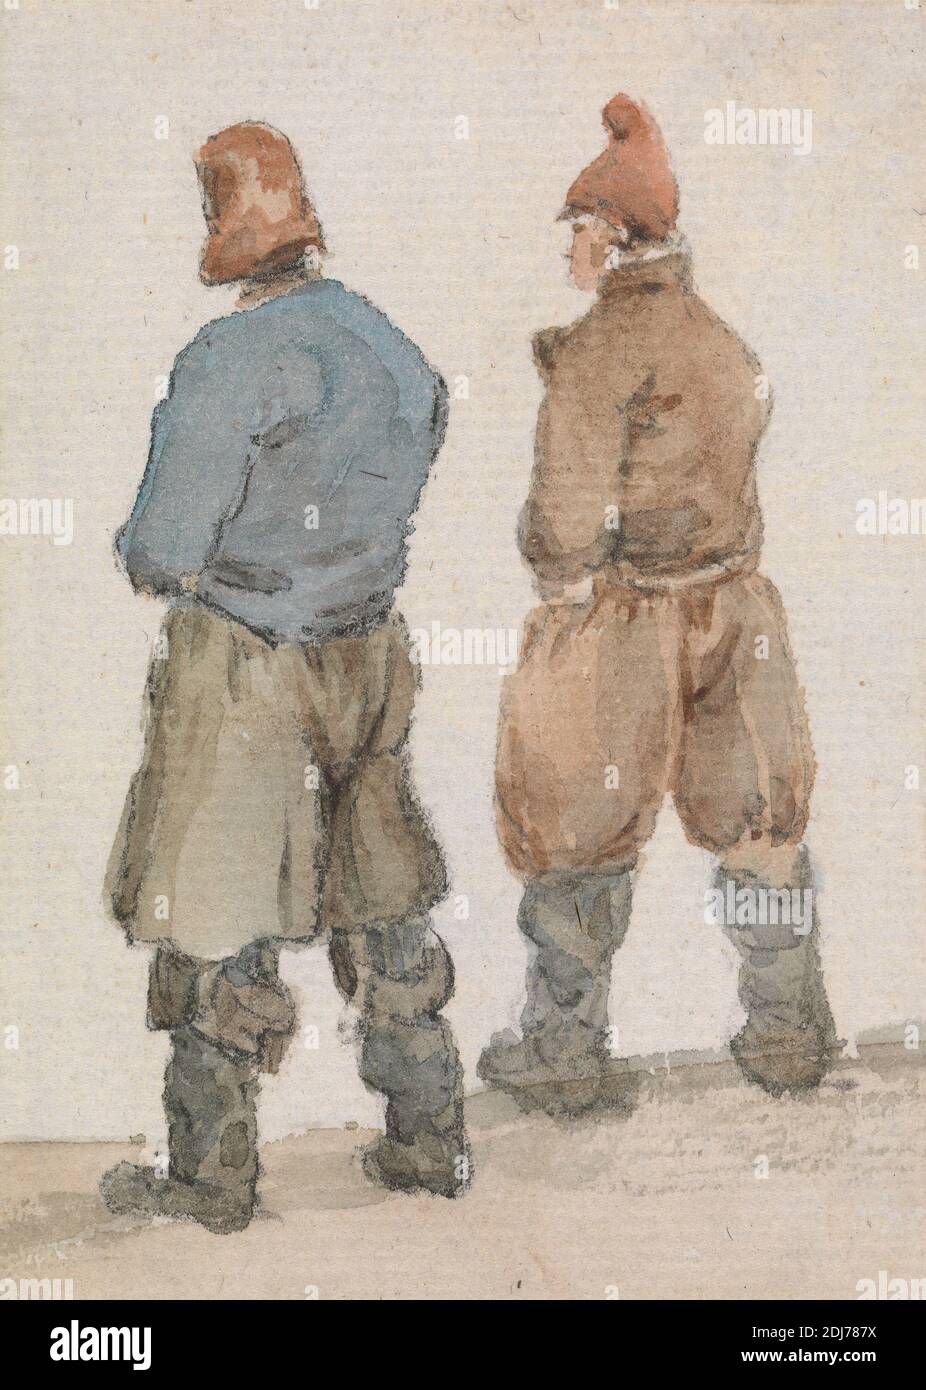 Two Fishermen seen from Behind, Joseph Stannard, 1797–1830, British, undated, Watercolor and graphite on medium, moderately textured, blued white laid paper, Sheet: 3 1/2 × 2 1/2 inches (8.9 × 6.4 cm), caps (headgear), costume, figure study, fishermen (people), genre subject Stock Photo